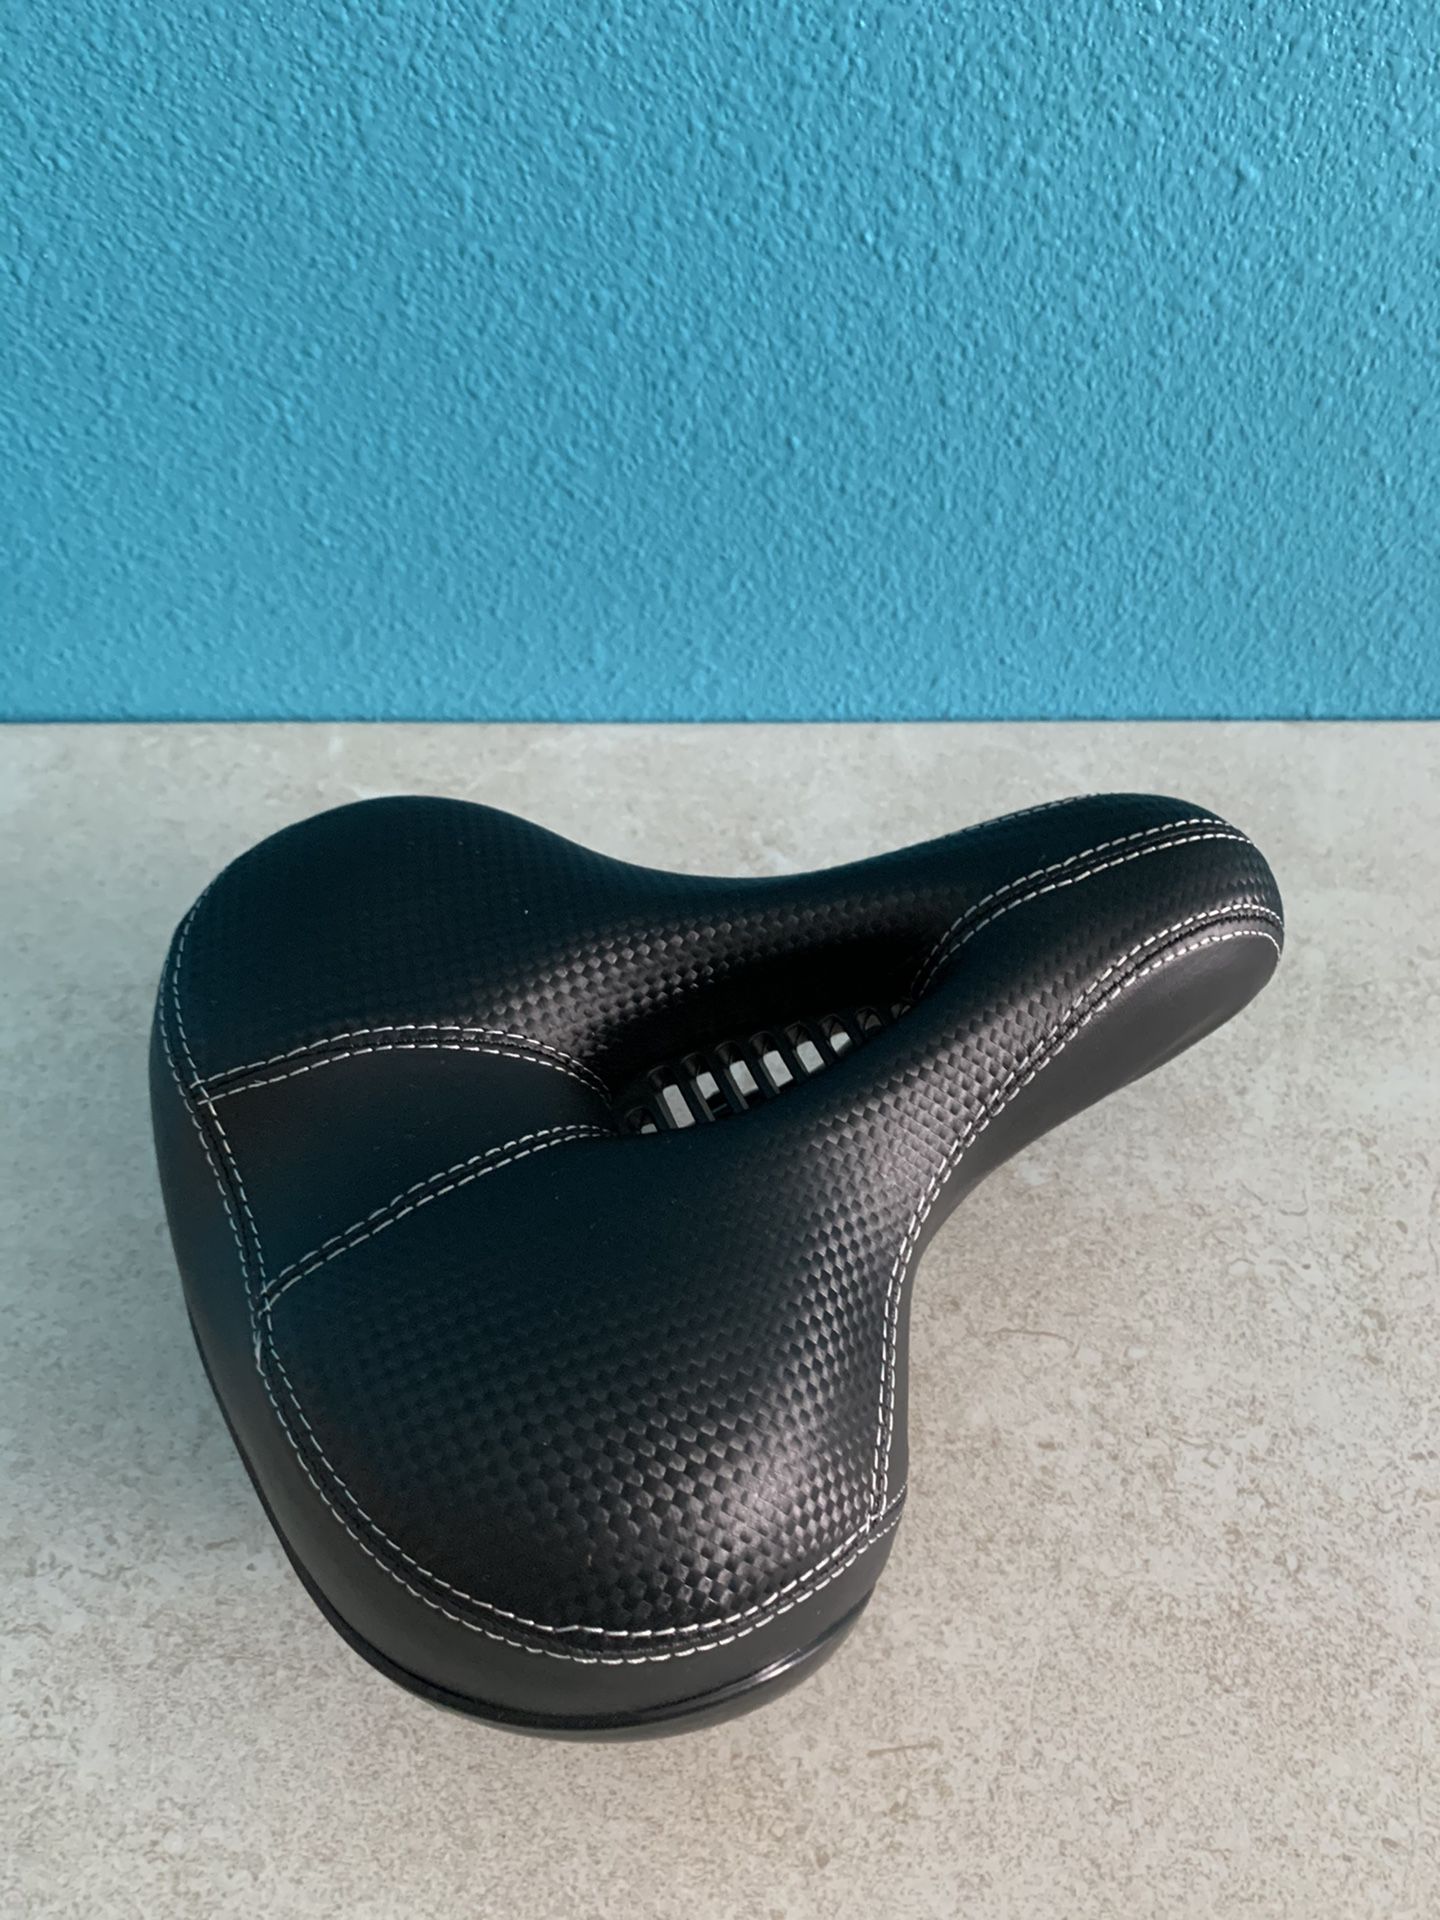 Brand New XL Wide Bicycle Cruiser Seat - Universal Fit - For Any Bike